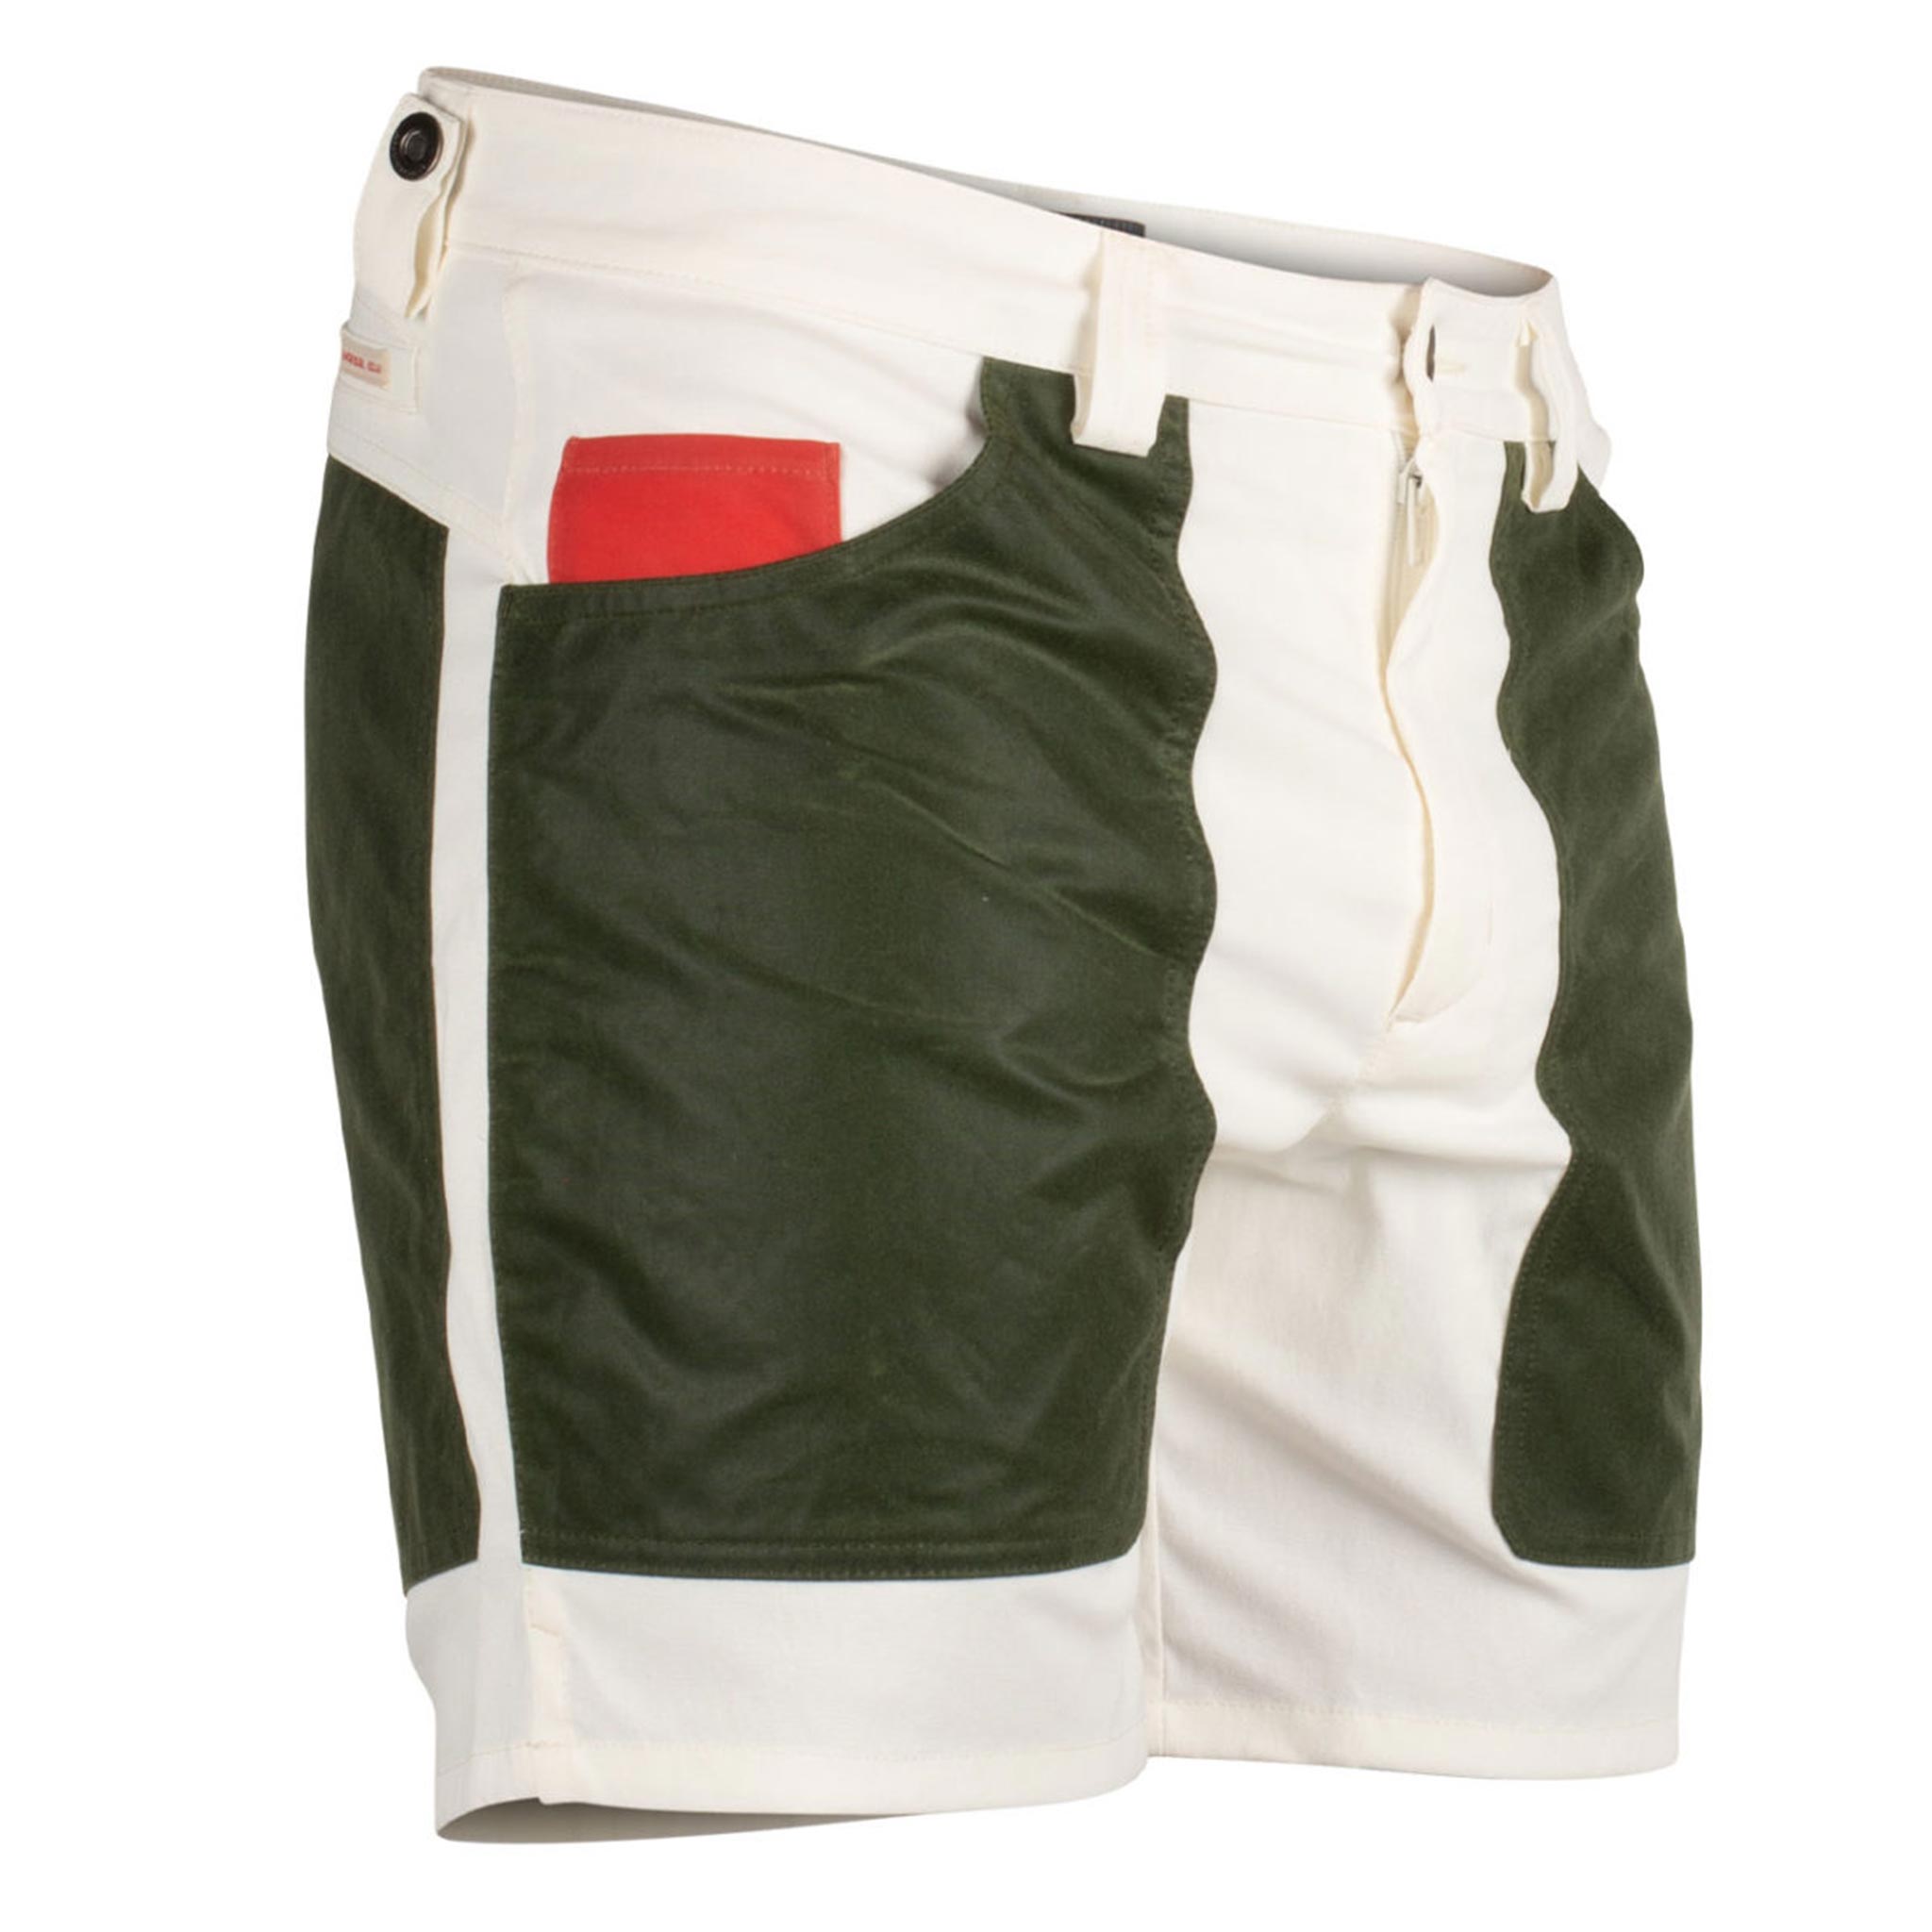 Field Shorts in Off White/Green